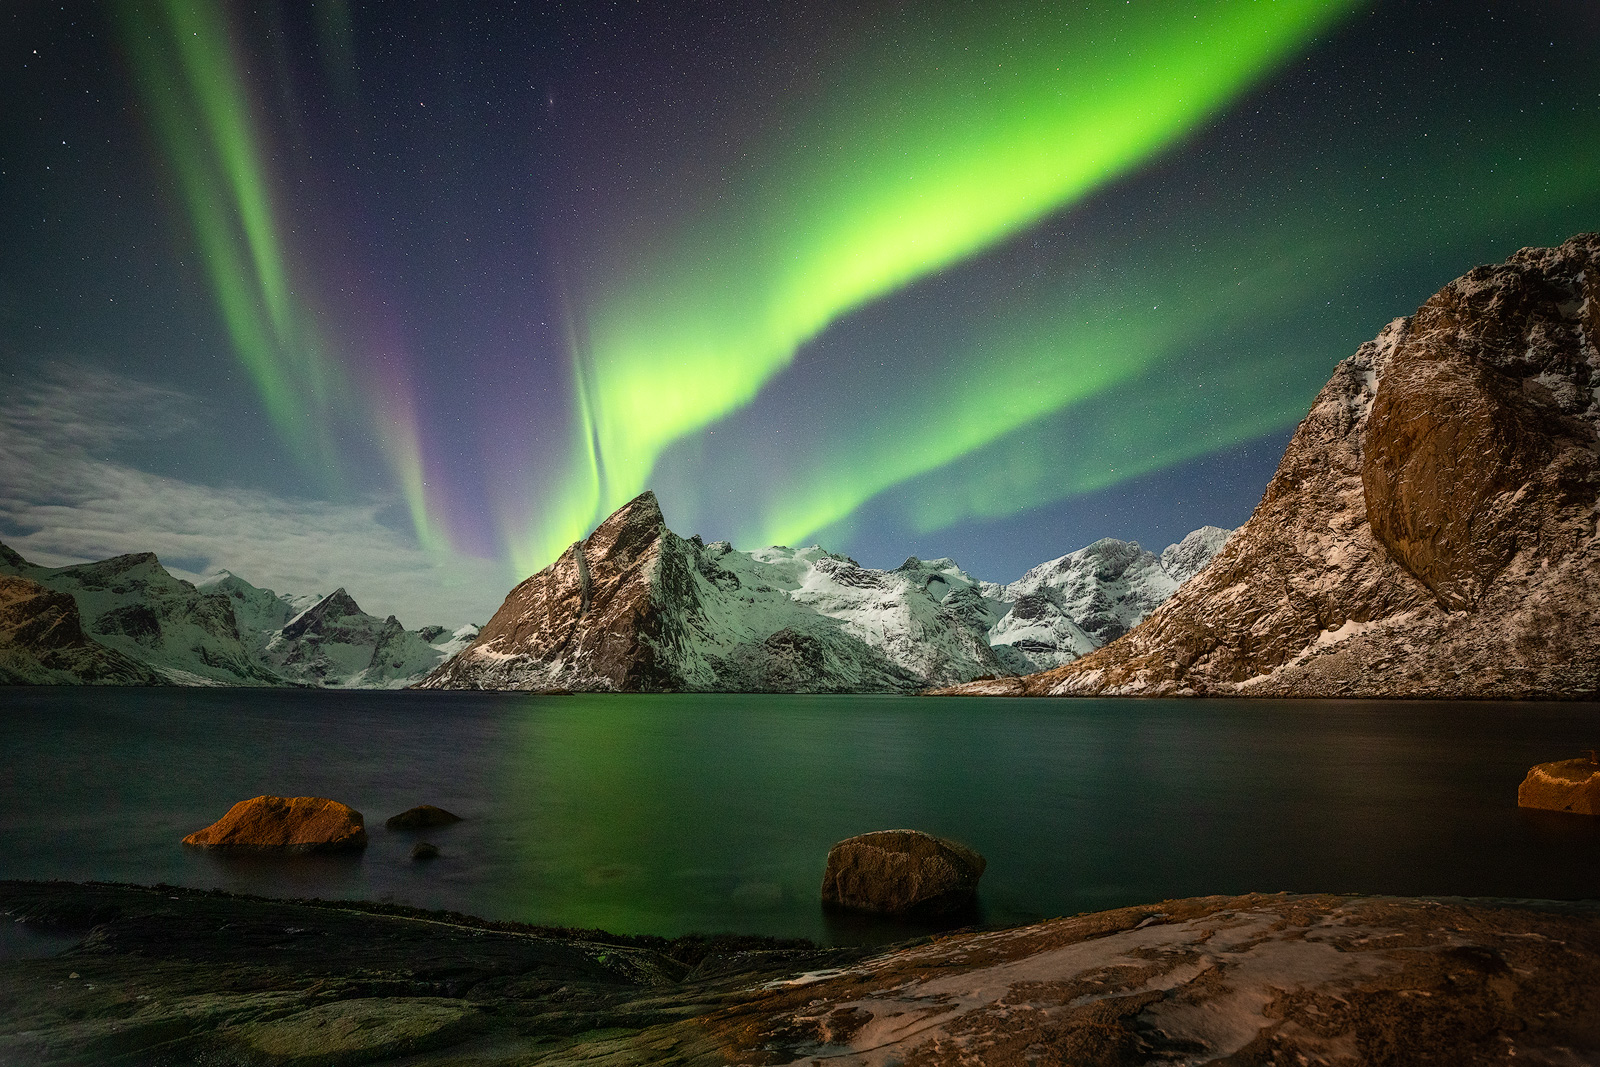 The aurora borealis over moonlit mountains at Hamnoy.